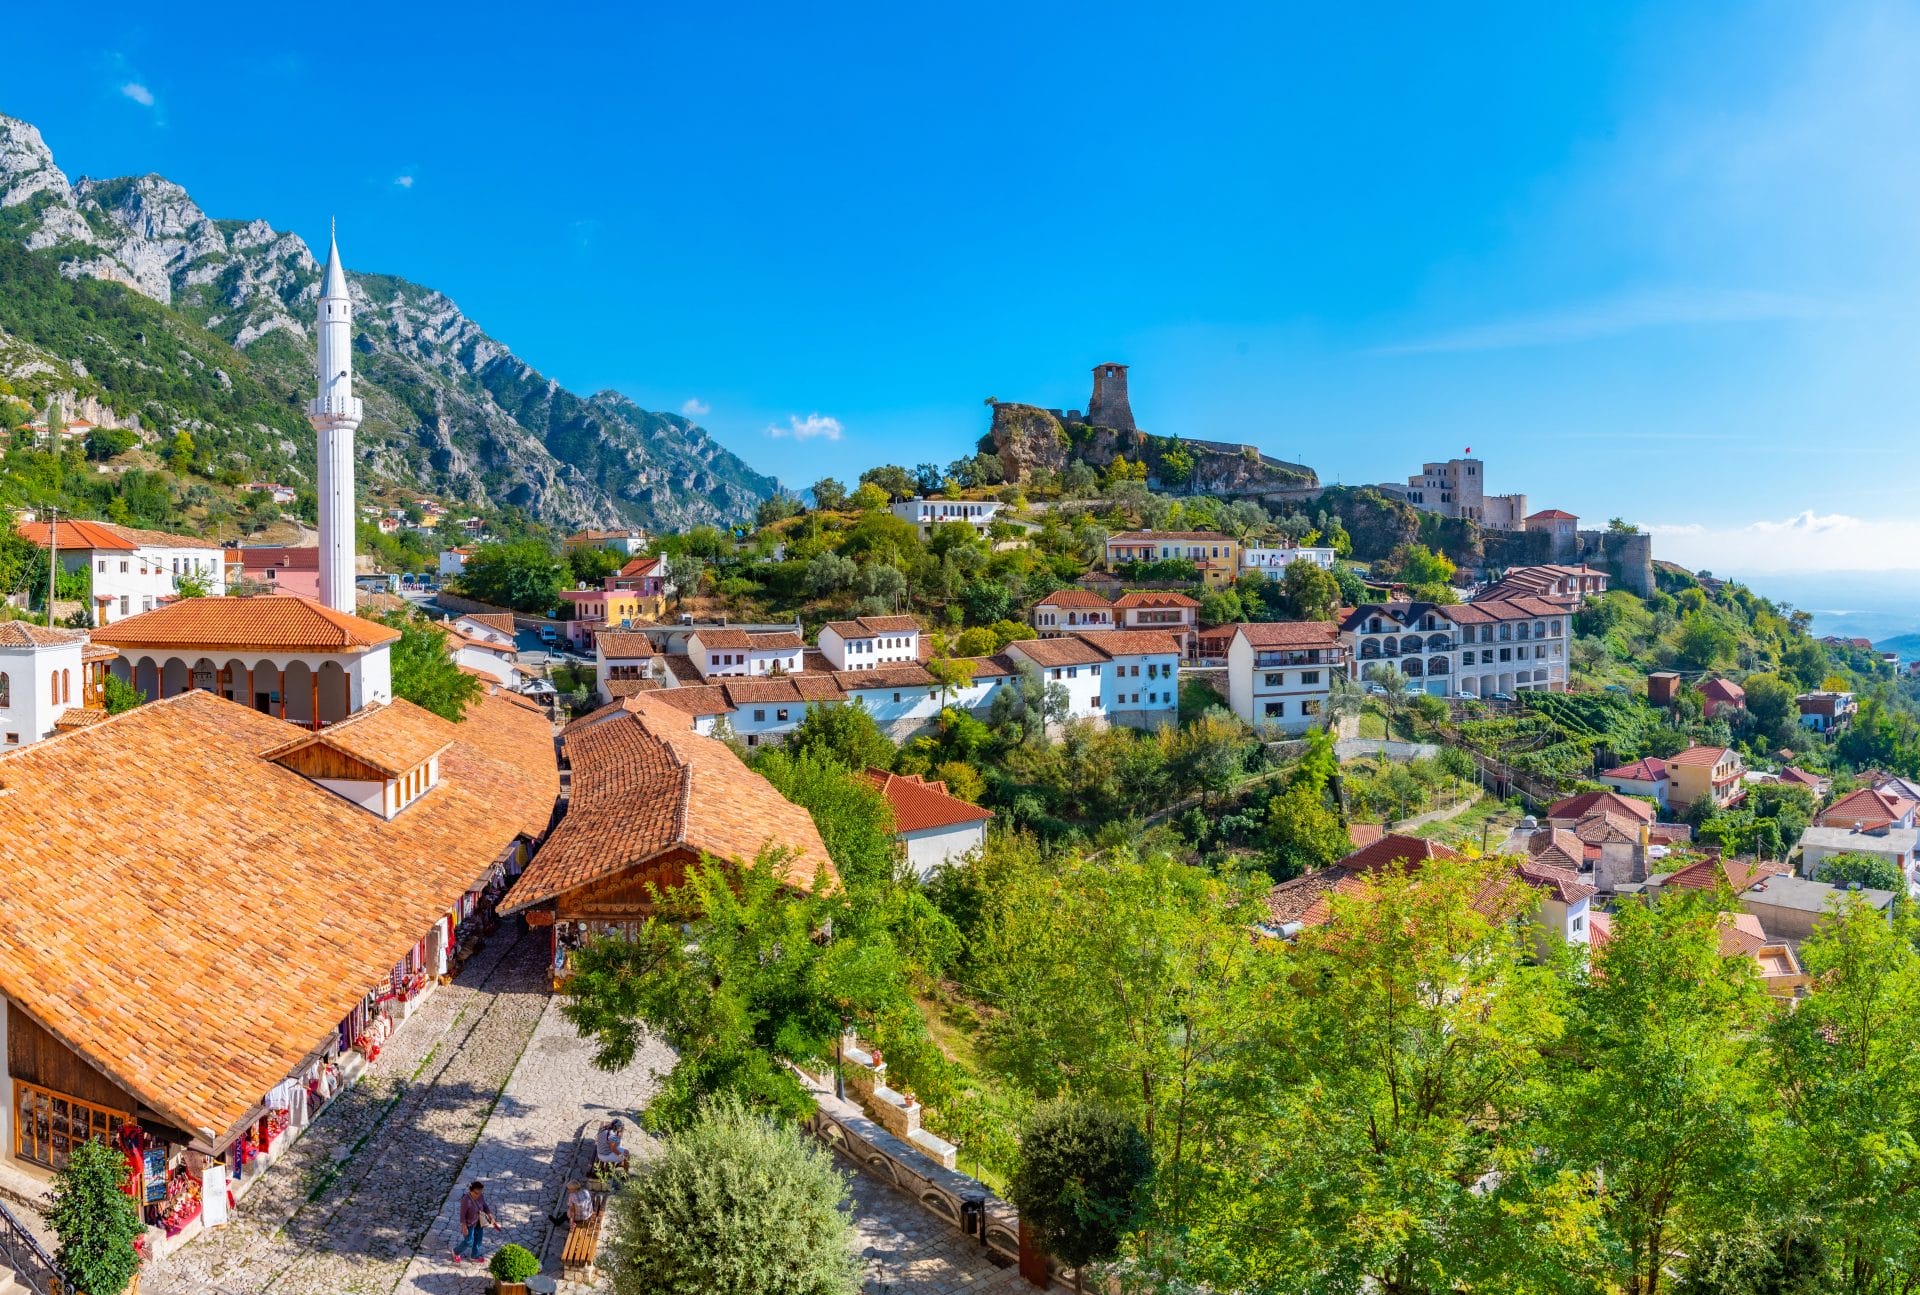 Historic Kruje Castle perched on the mountain